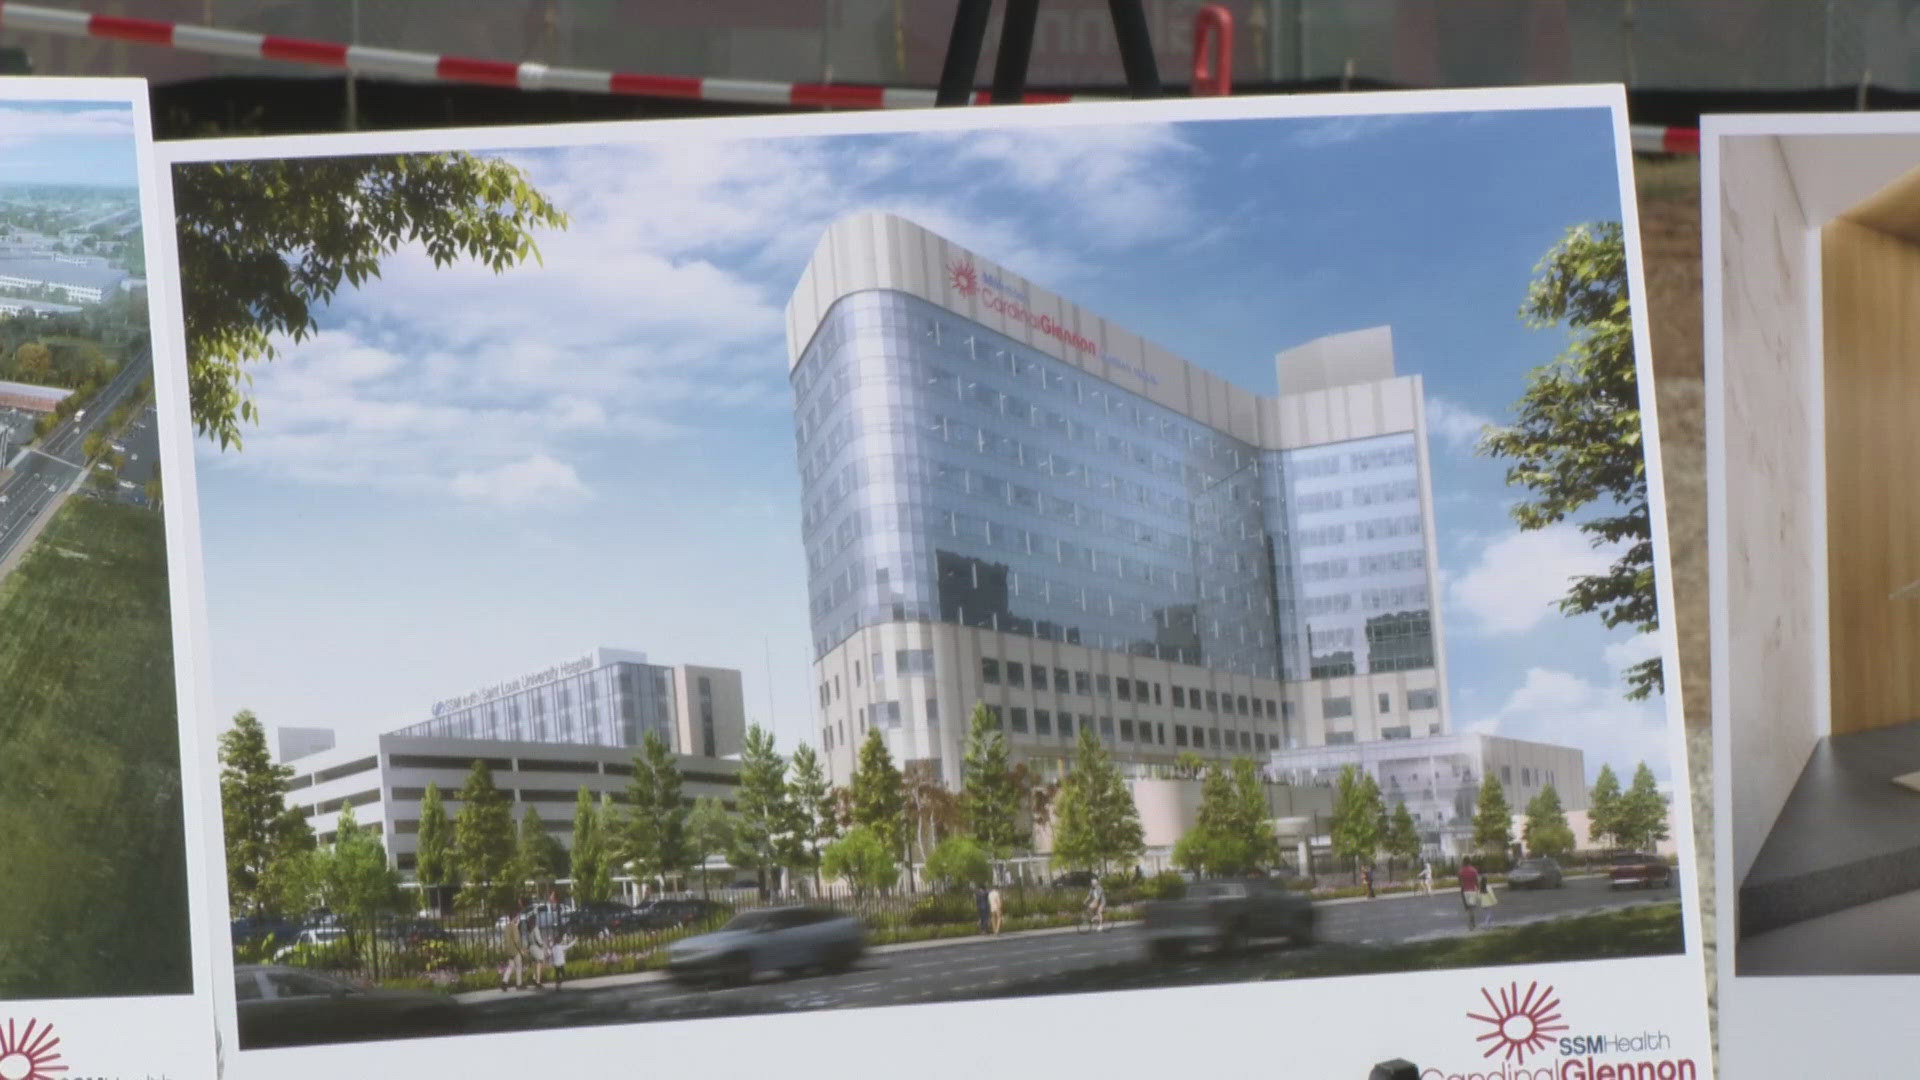 Construction of a new Cardinal Glennon's Children's Hospital in St. Louis is underway. It is expected to be completed in late 2027.